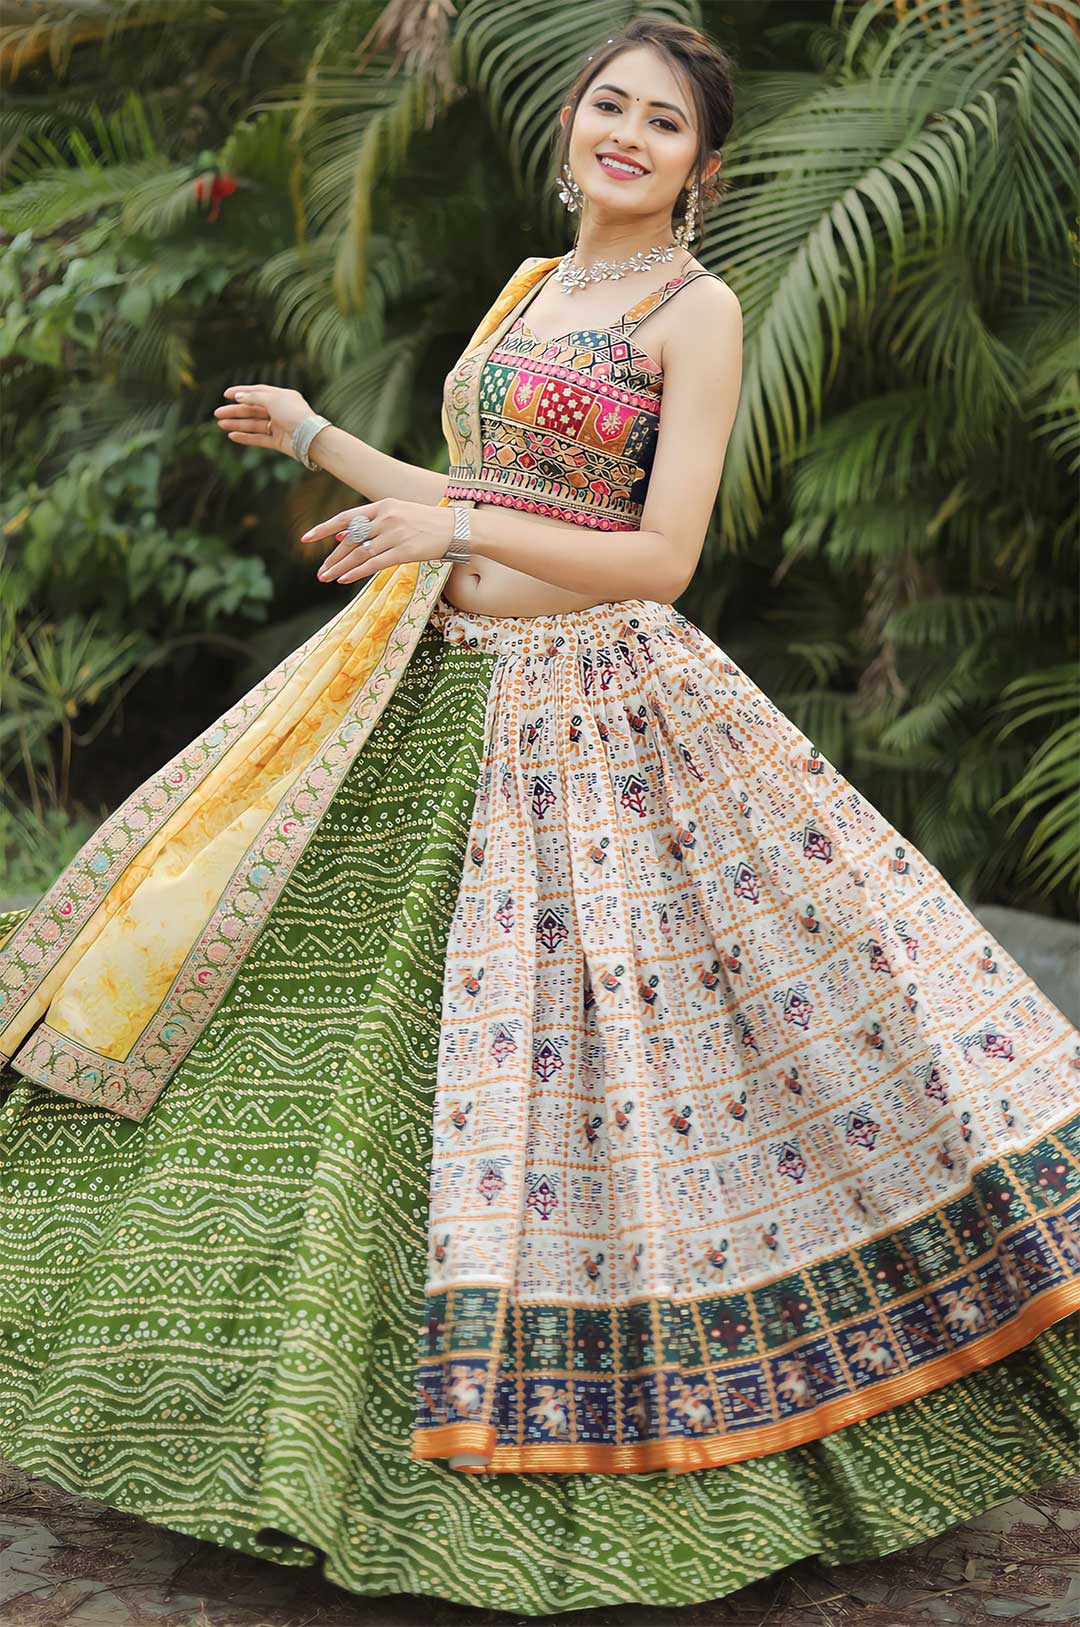 Gujrati Pattern Lehengas with Multi colors - Welcome to Aaradhyafancy dresse